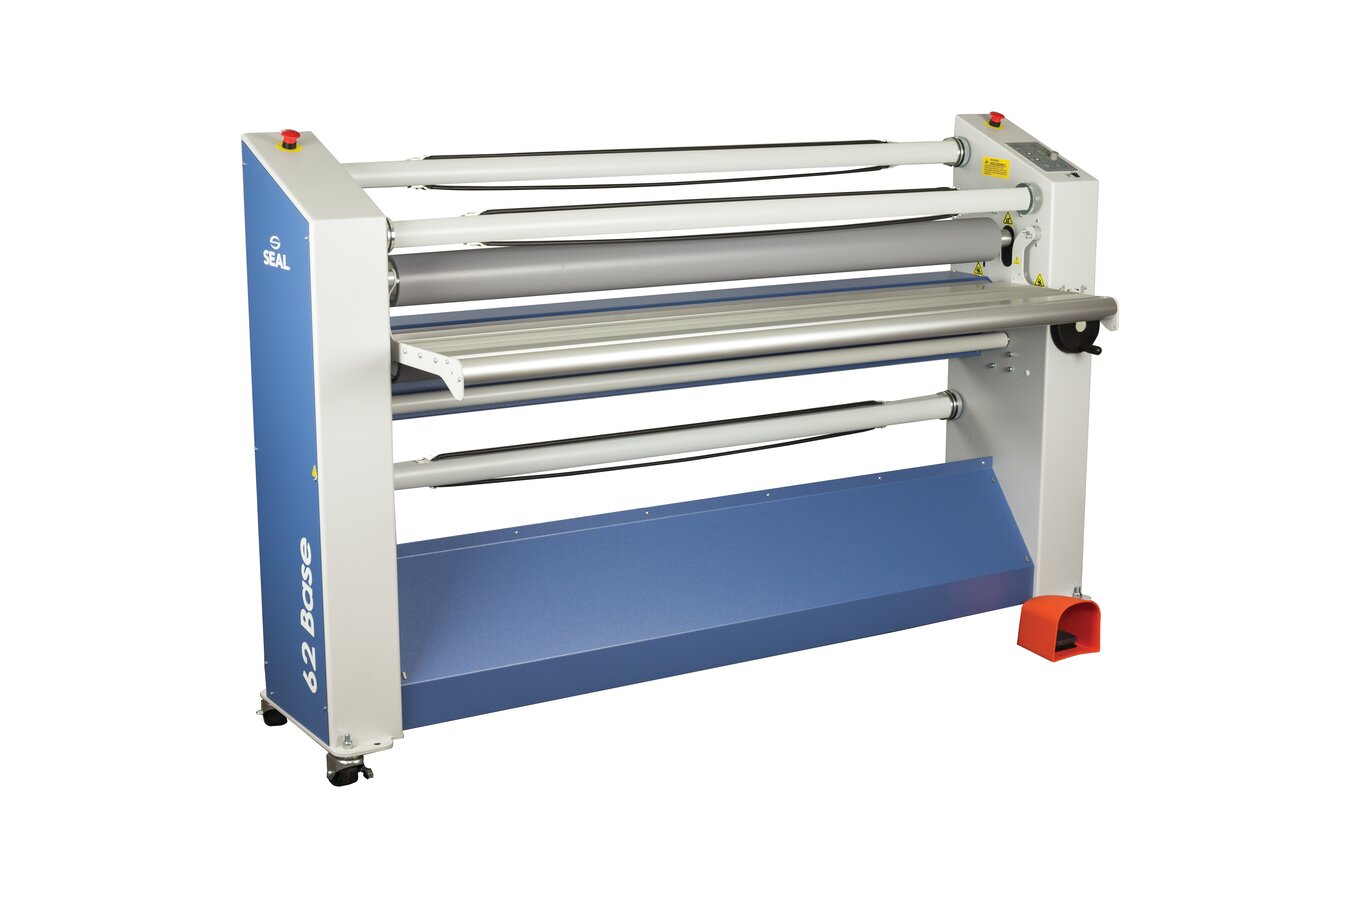 SEAL 62 Base Laminator For Mounting and Laminating Pressure Sensitive Graphics - Call For Special Prices and Promotions